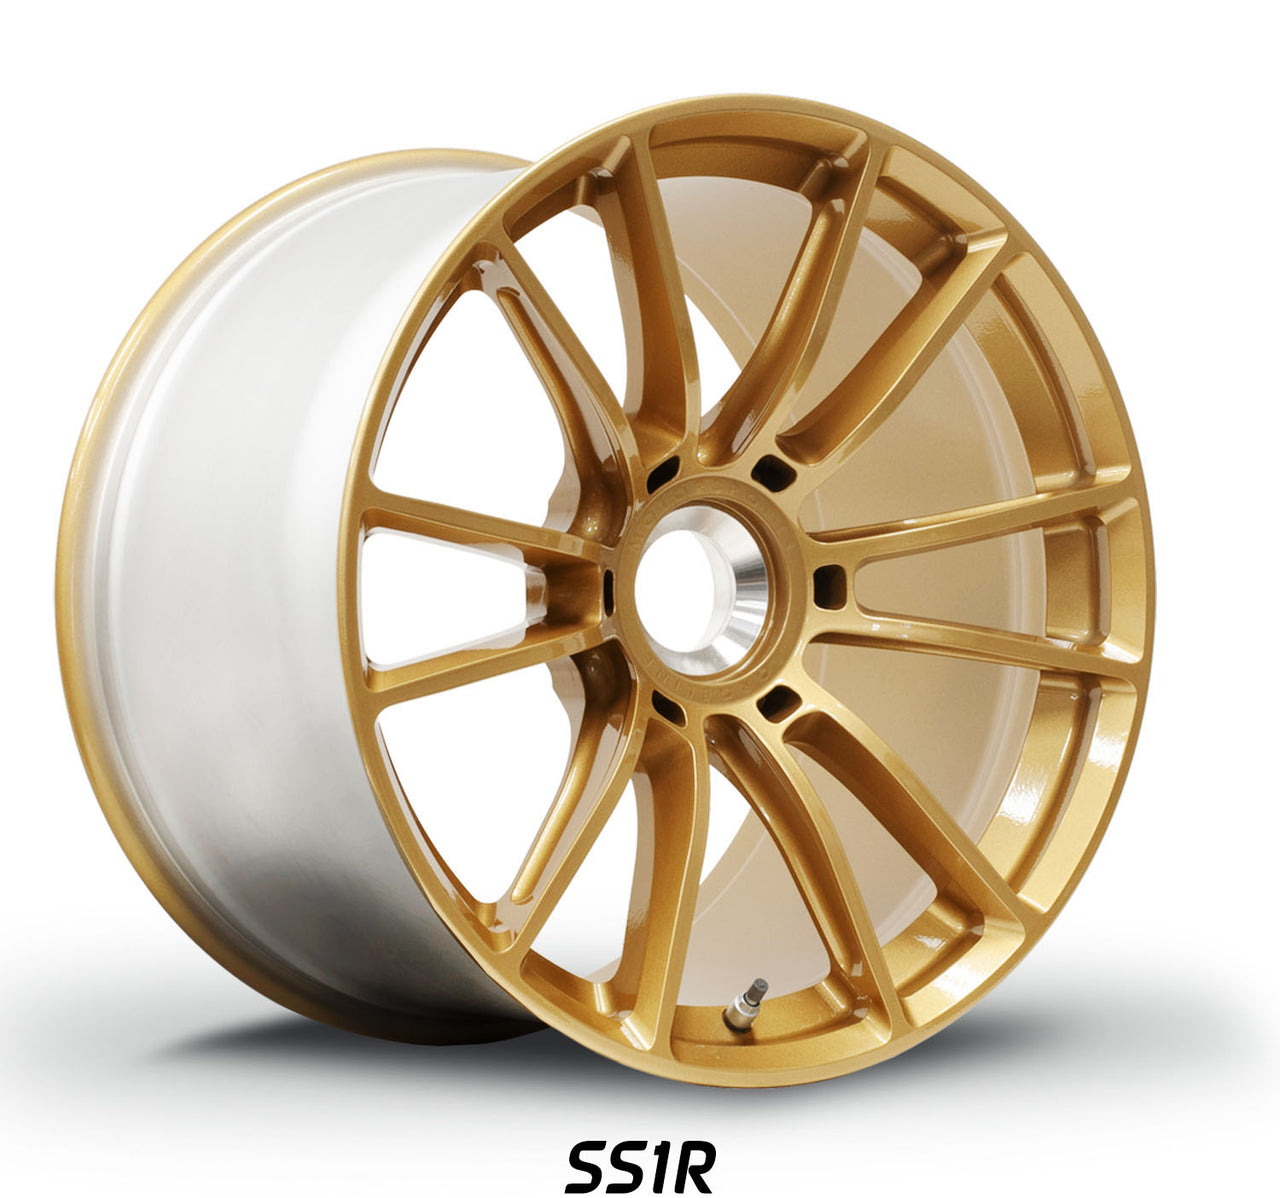 Porsche 2023 911 GT3 RS Forgeline SS1R Race Gold forged monoblock wheel for track day, HPDE